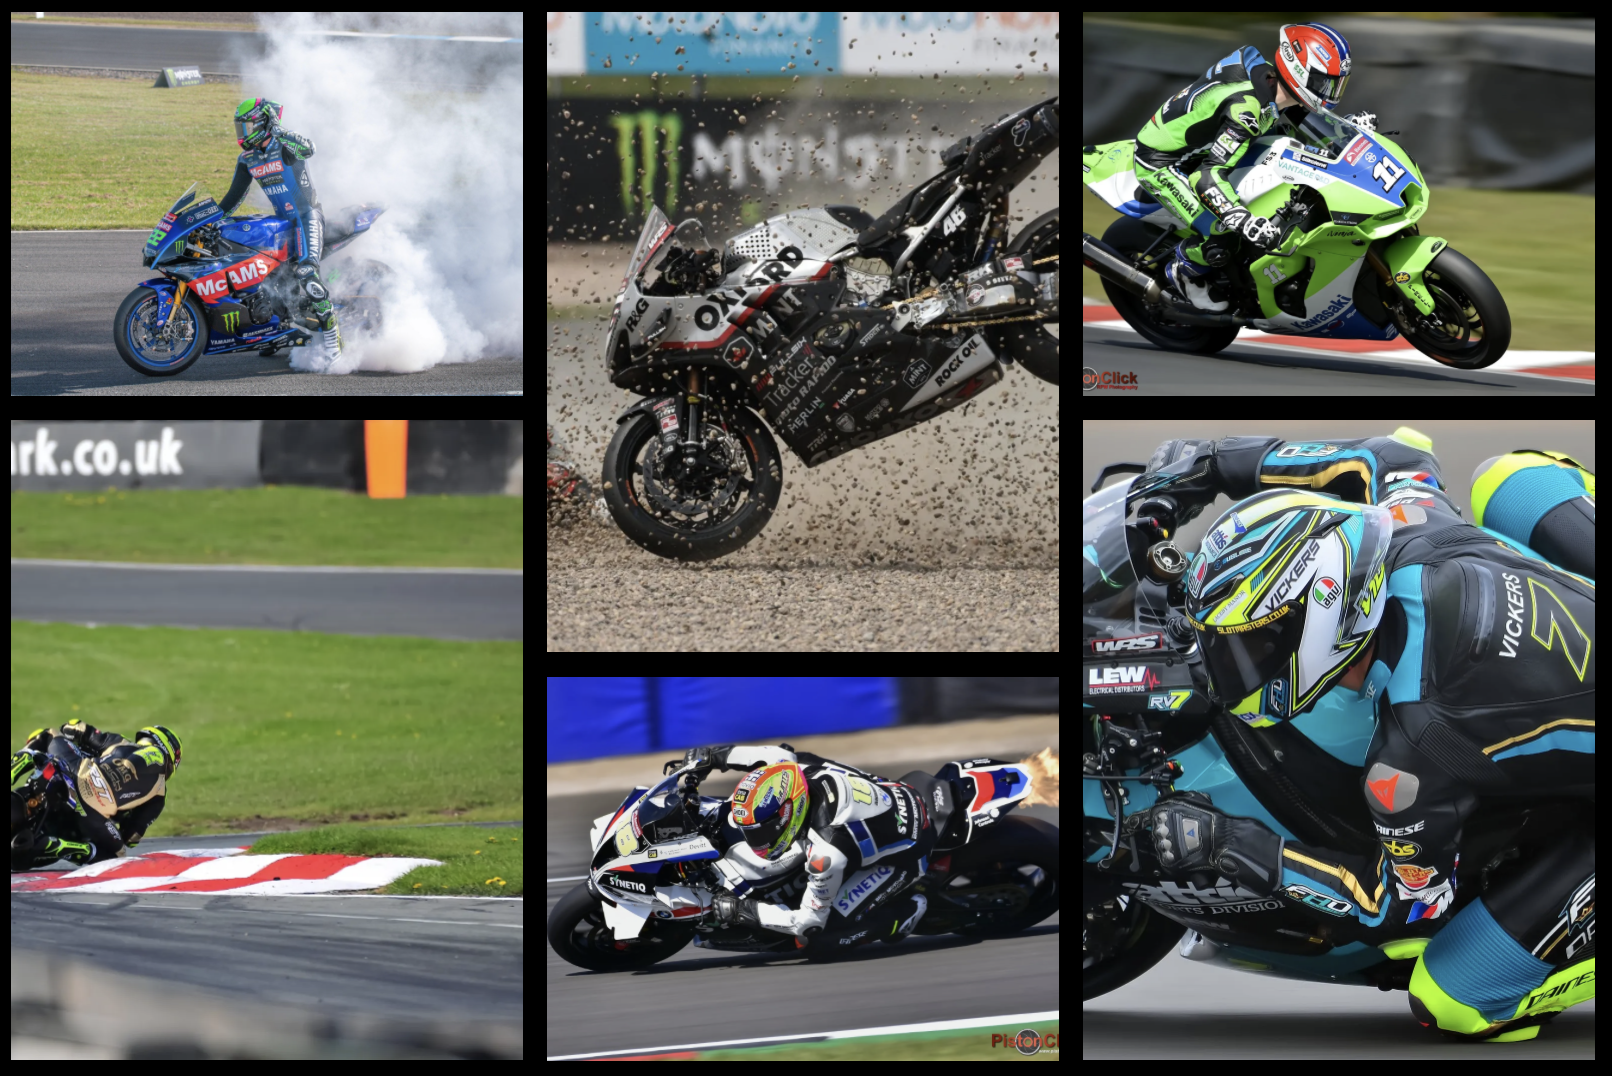 Our previous British Superbike and support class reports can be found here.